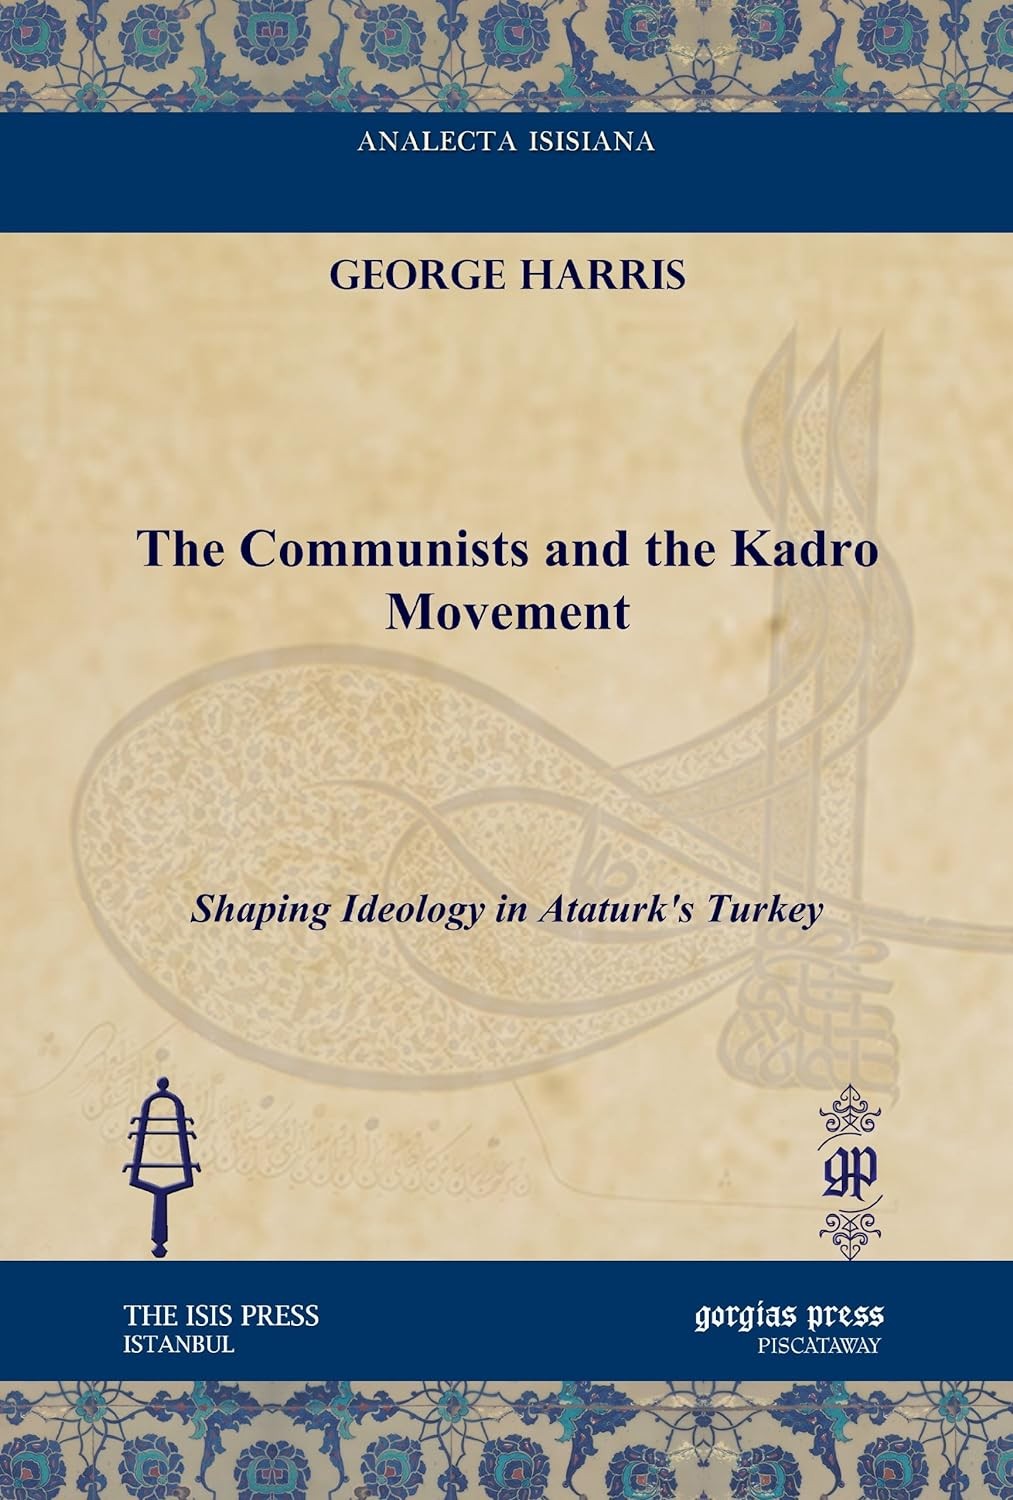 The Communists and the Kadro Movement: Shaping Ideology in Ataturk's Turkey